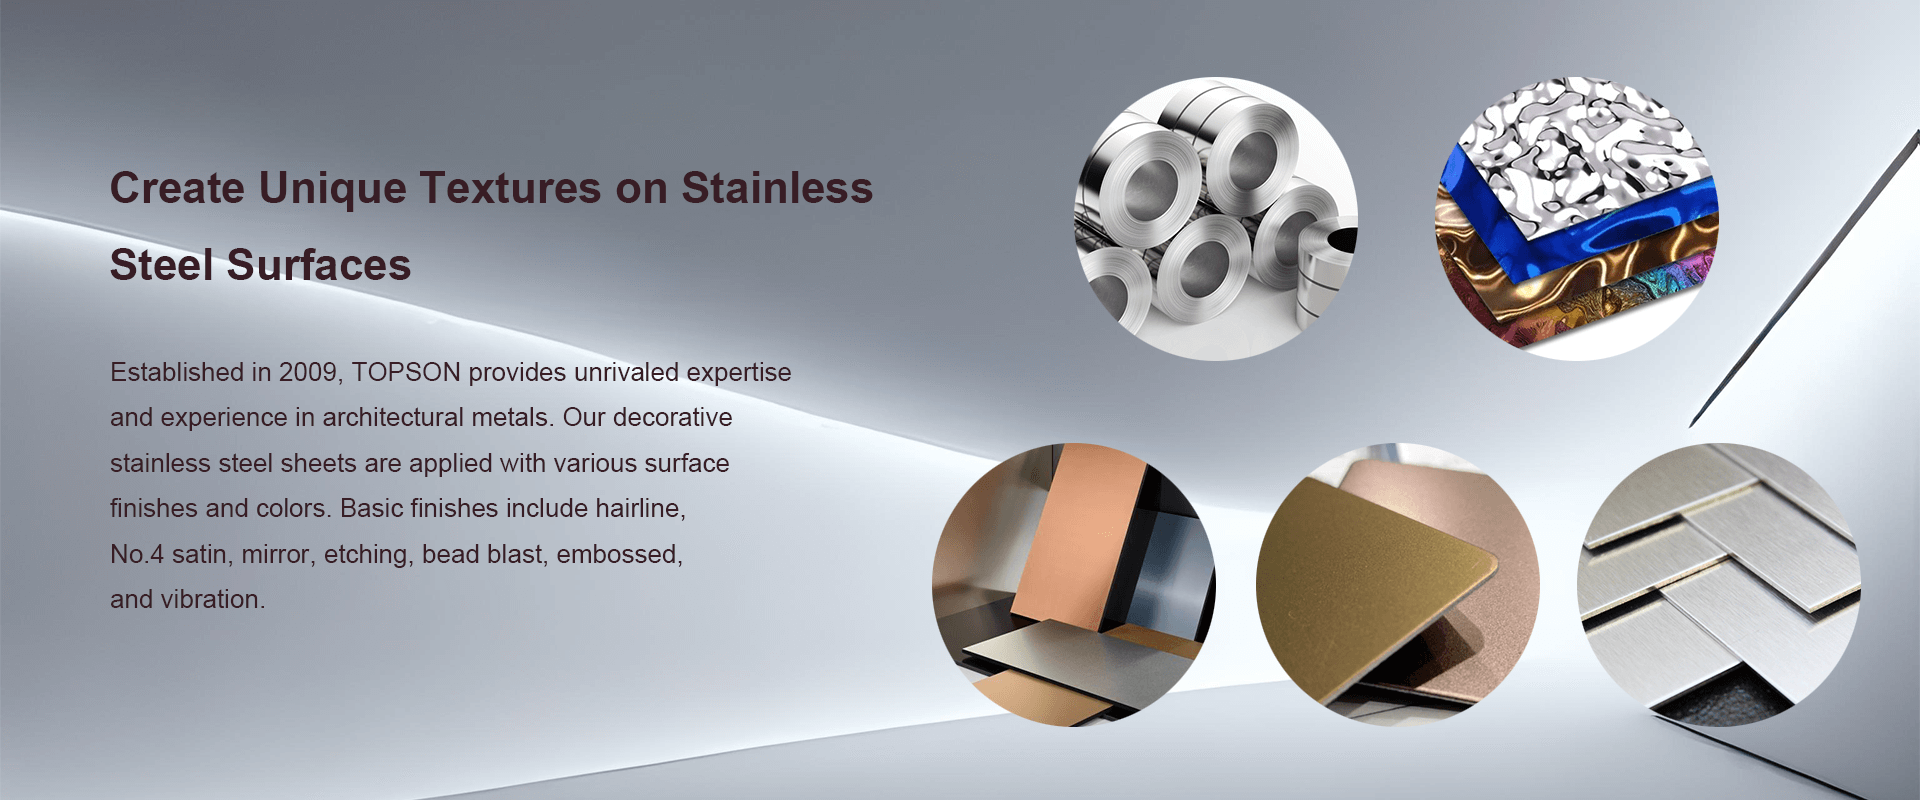 Stainless Steel Finishing